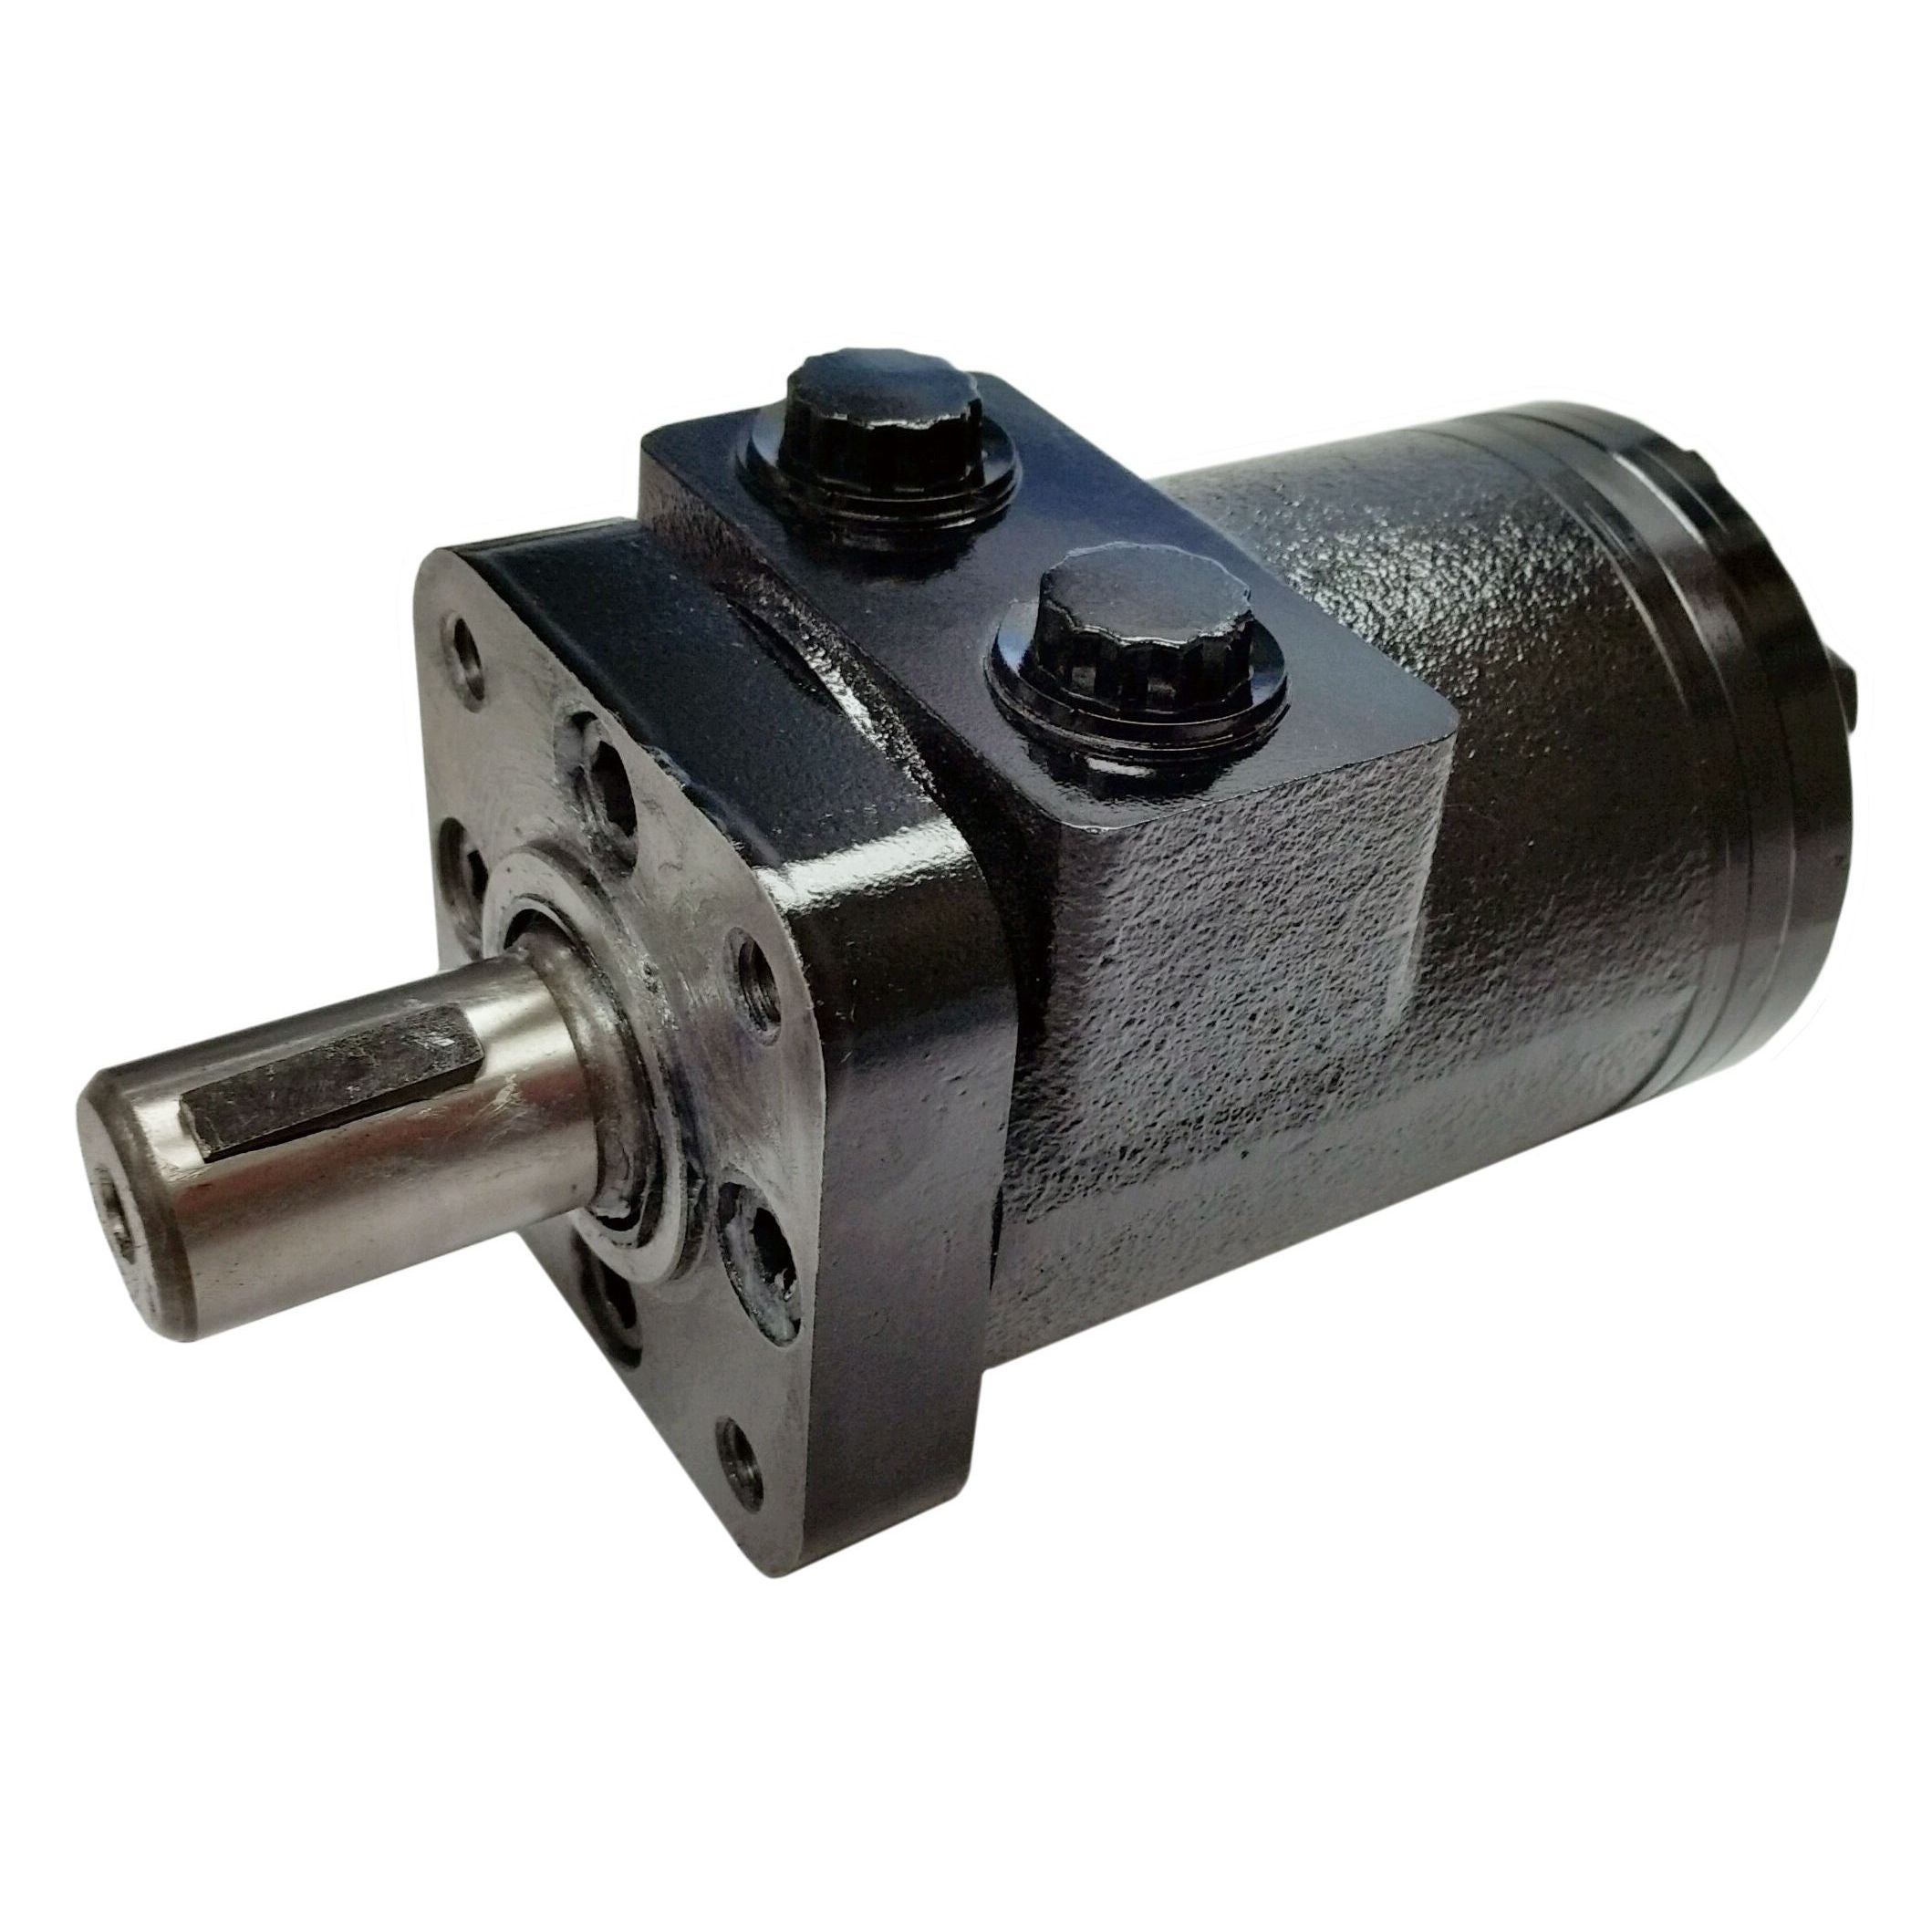 BMPH-160-H4-S-S : Dynamic LSHT Motor, 157cc, 383RPM, 2673in-lb, 2031psi Differential, 15.85GPM, SAE A 4-Bolt Mount, 6-Tooth Shaft, Side Ported, #10 SAE (5/8")